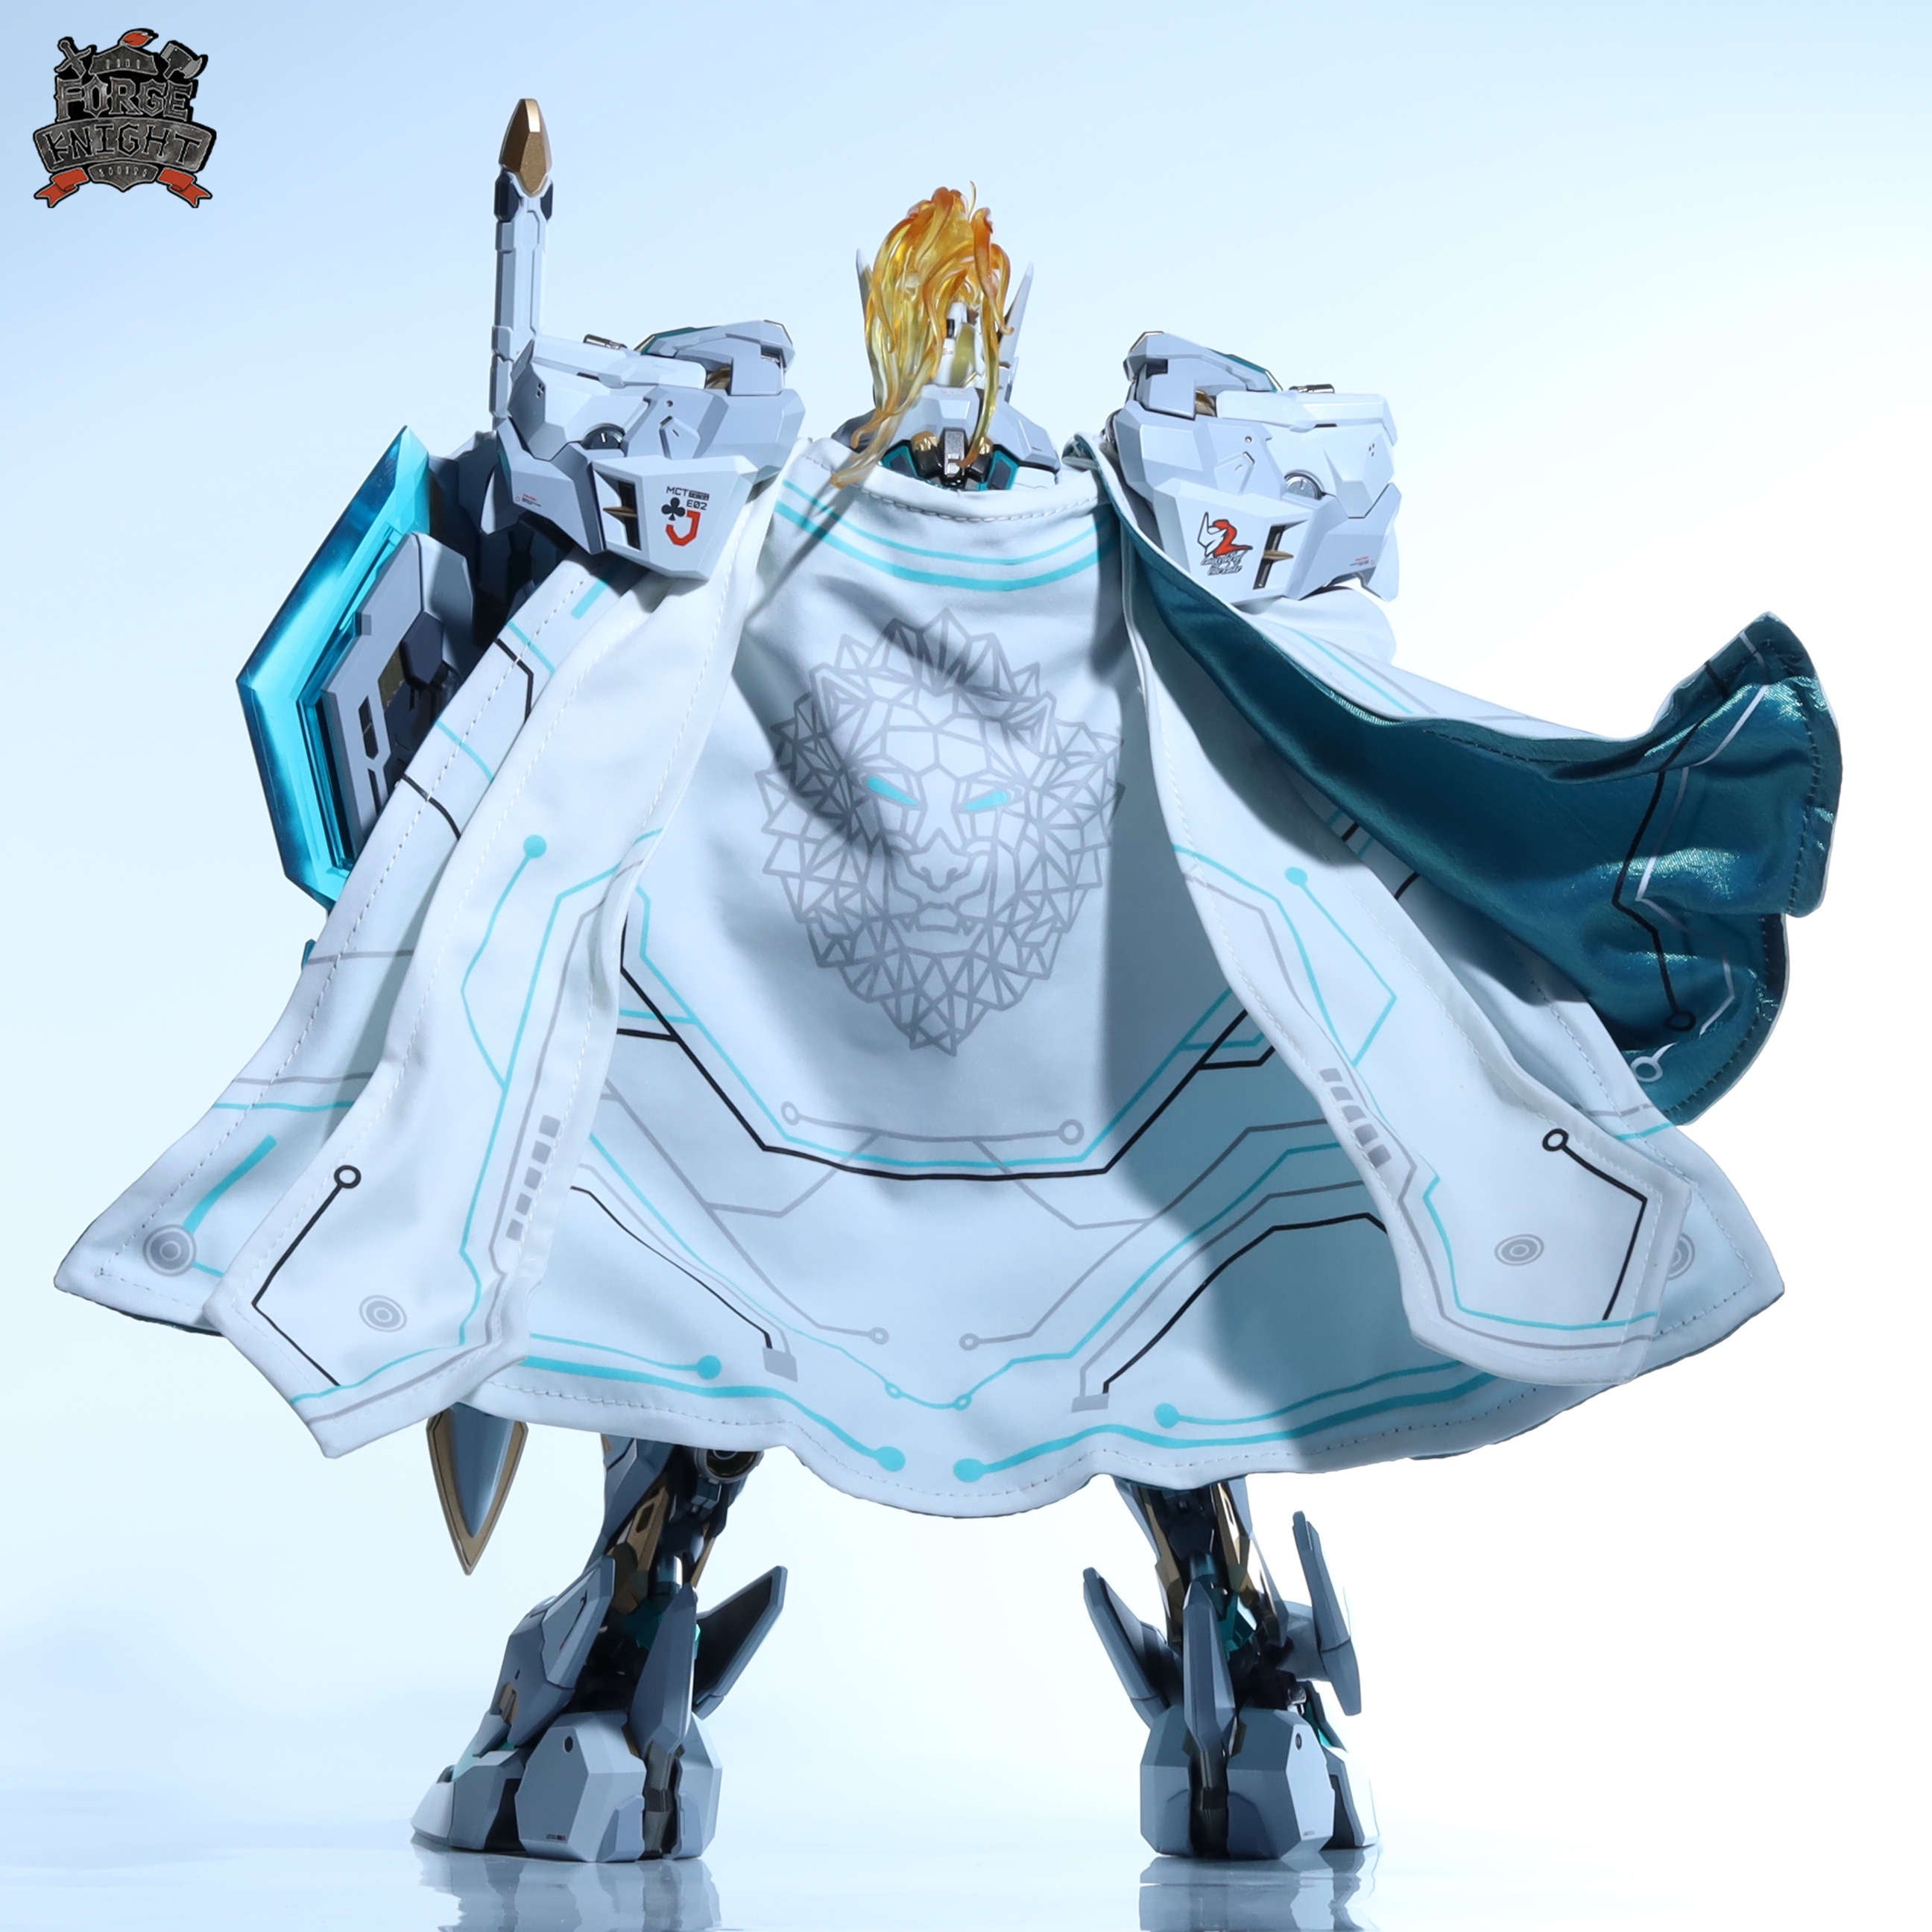 【READY FOR SHIP】 Custom cape set for Moshow progenitor effect "Lancelot of the lake"